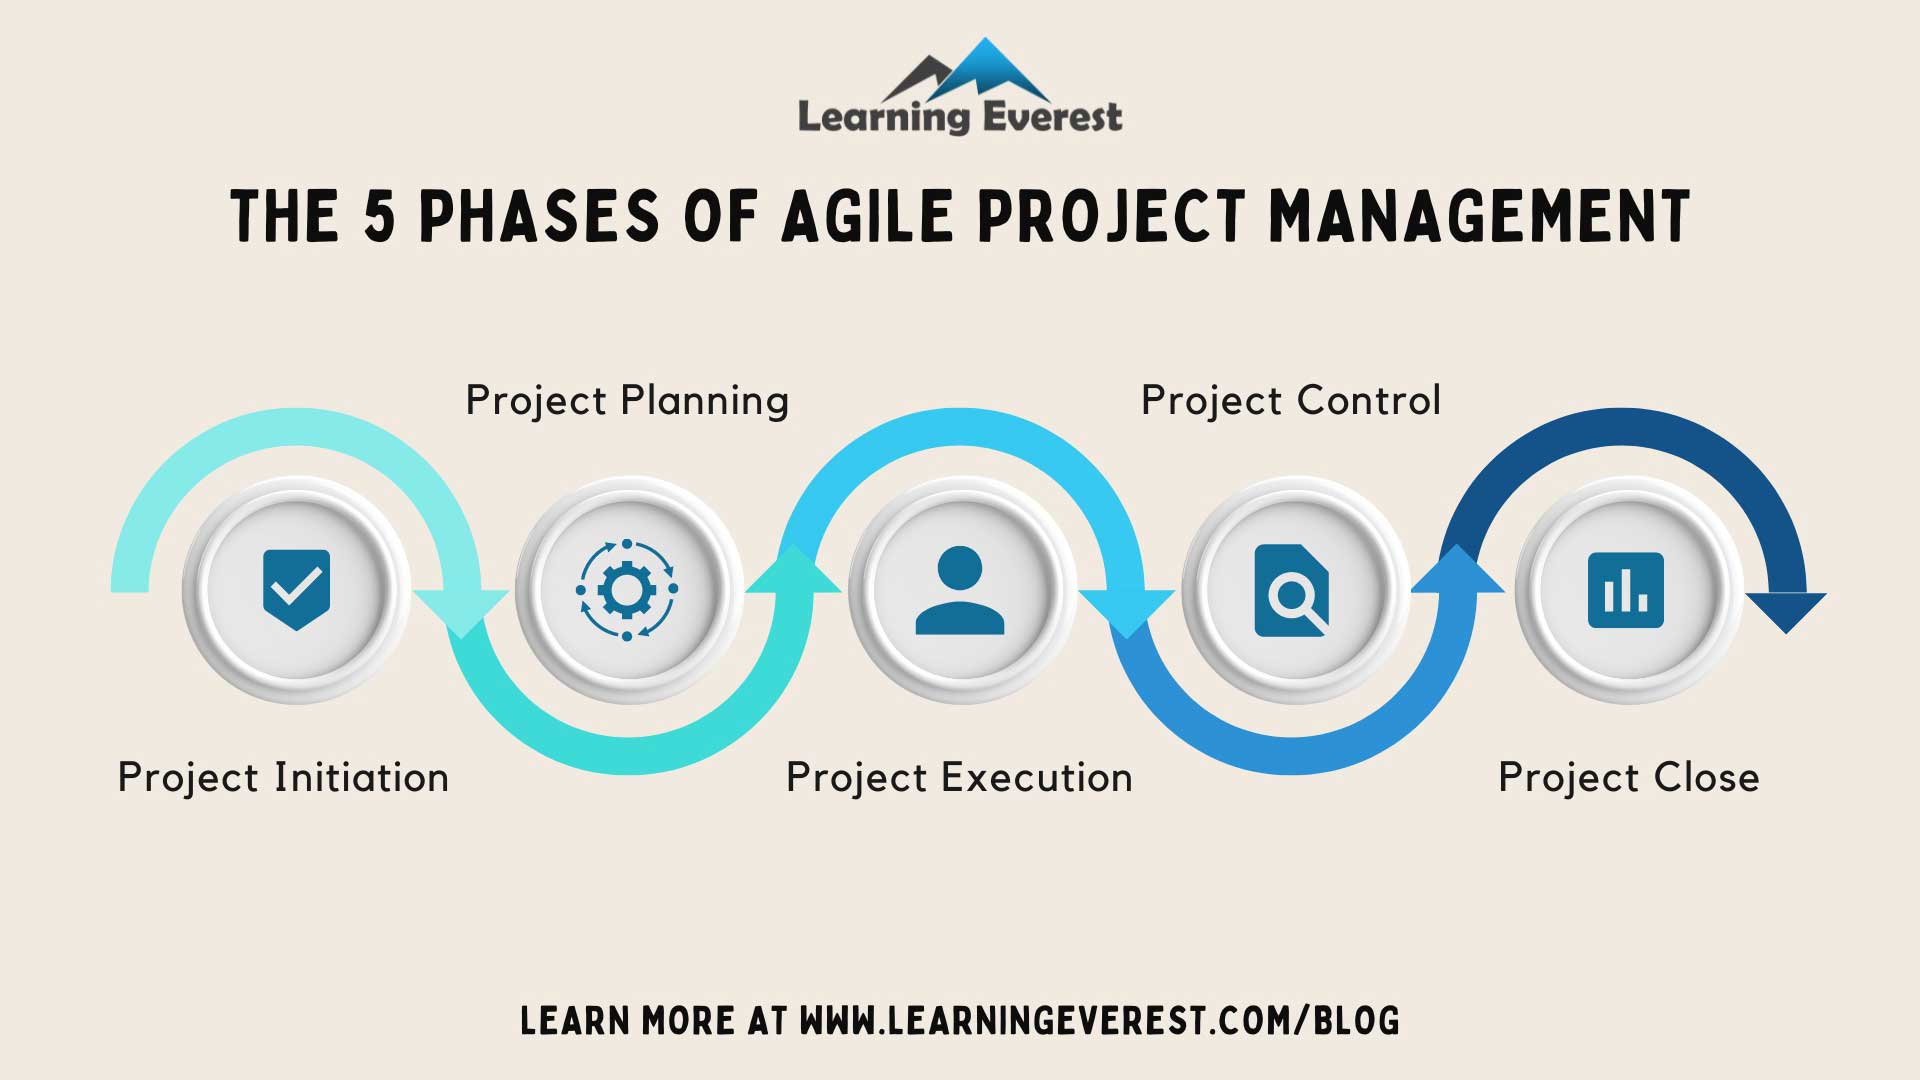 The 5 Phases of Agile Project Management